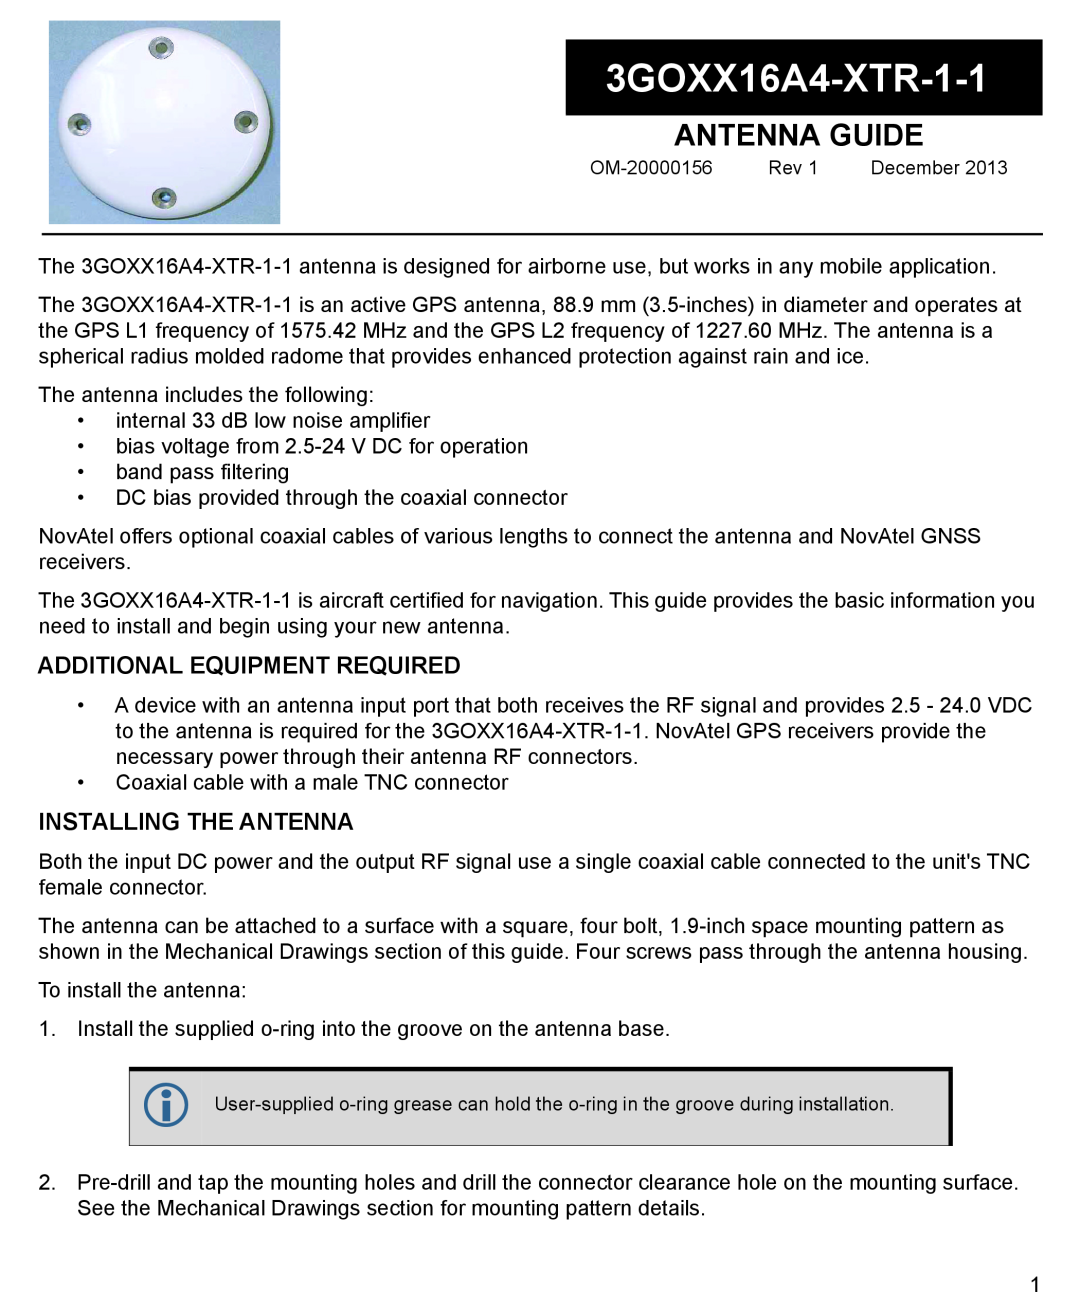 Novatel 3GOXX16A4-XTR-1-1 manual Additional Equipment Required, Installing The Antenna, Antenna Guide 